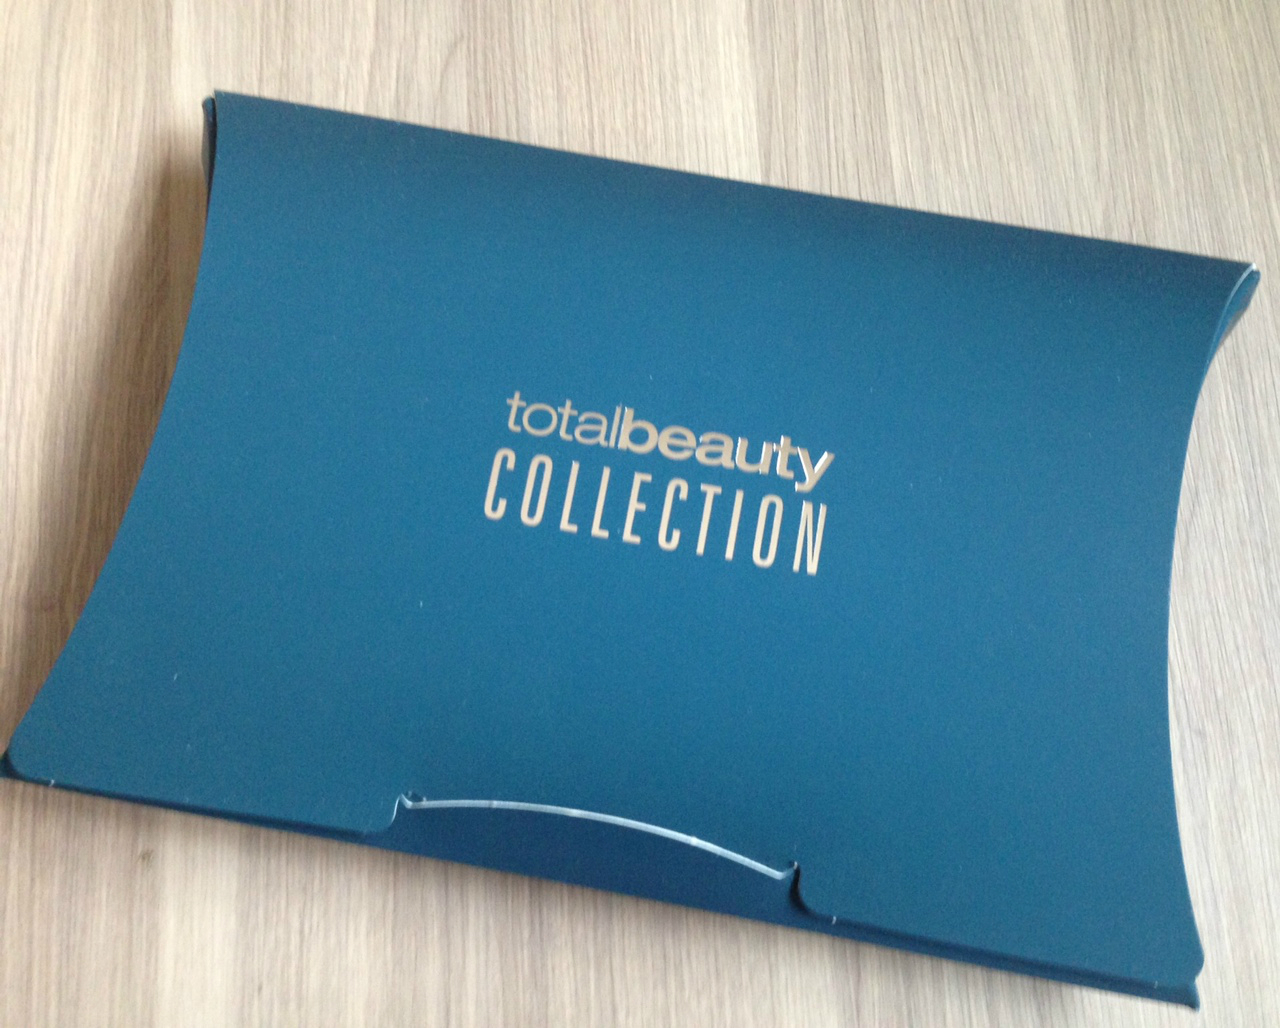 Revlon Total Beauty Collection Review & Coupon Code!